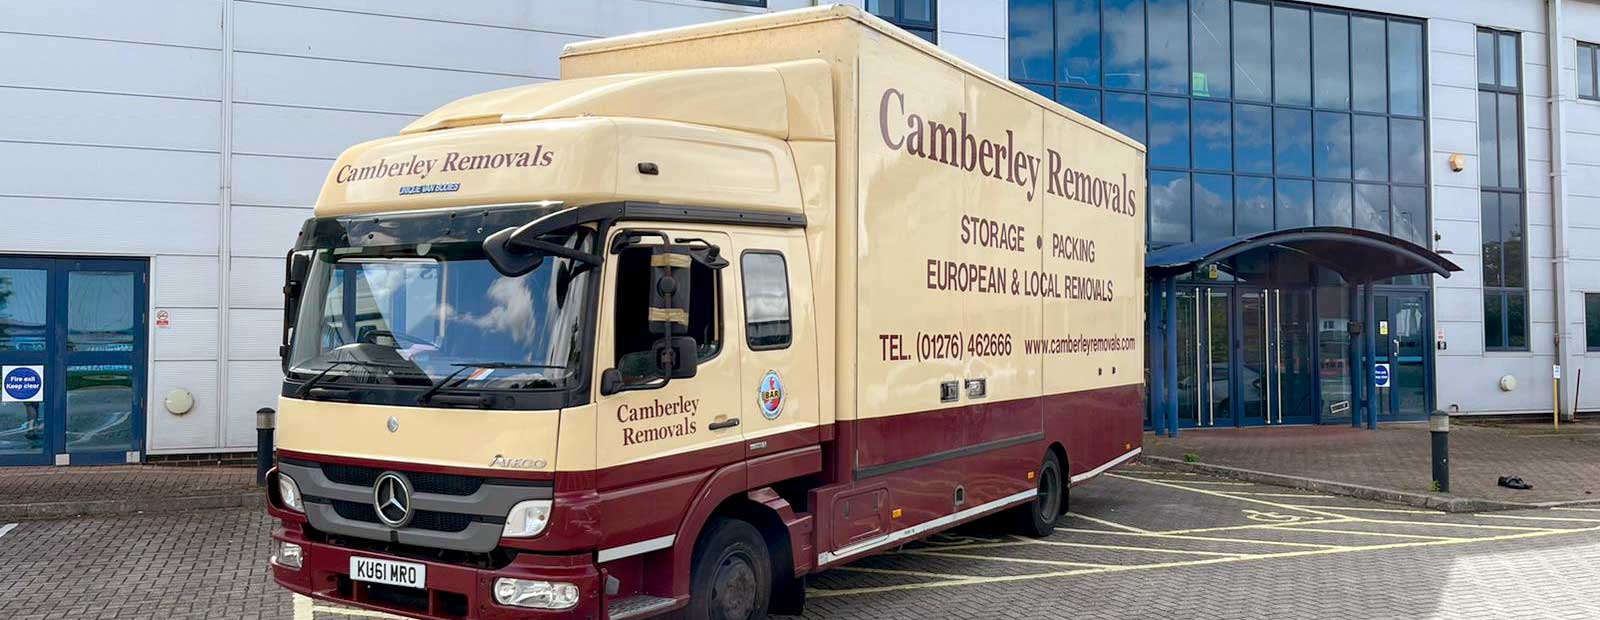 Camberley Removals & Storage vehicle outside office building